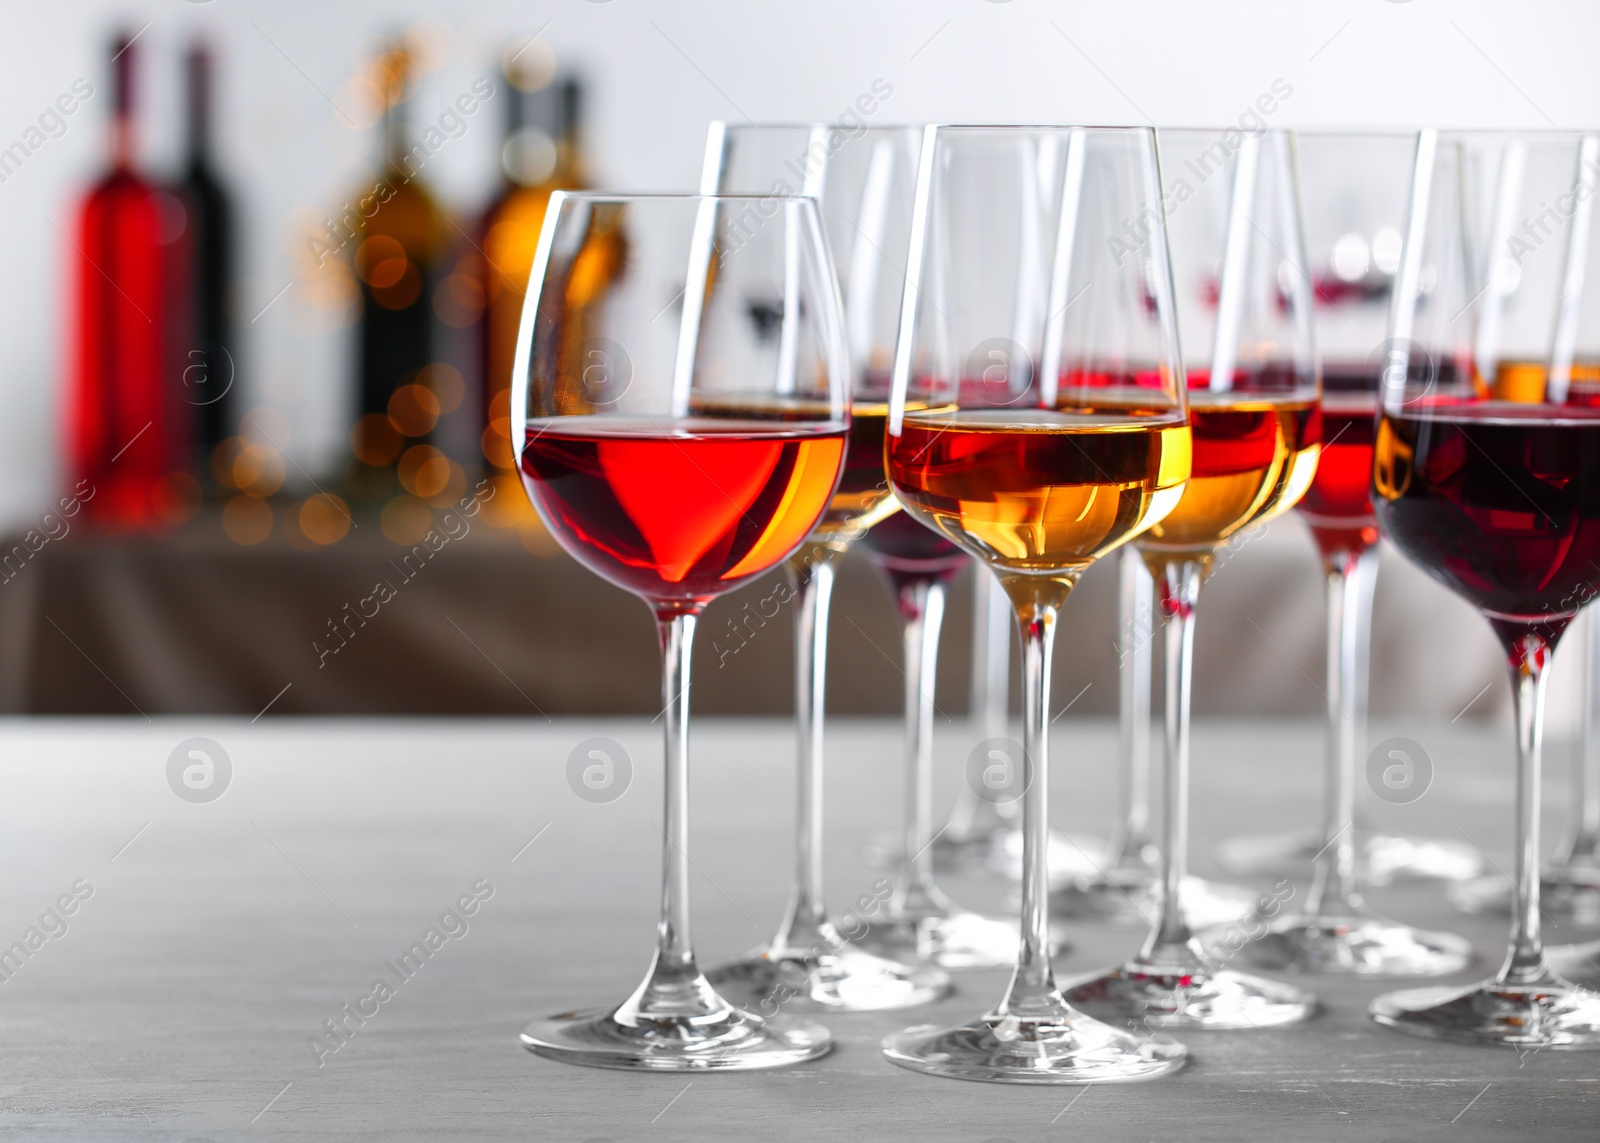 Photo of Glasses with different wines on table against blurred background. Space for text